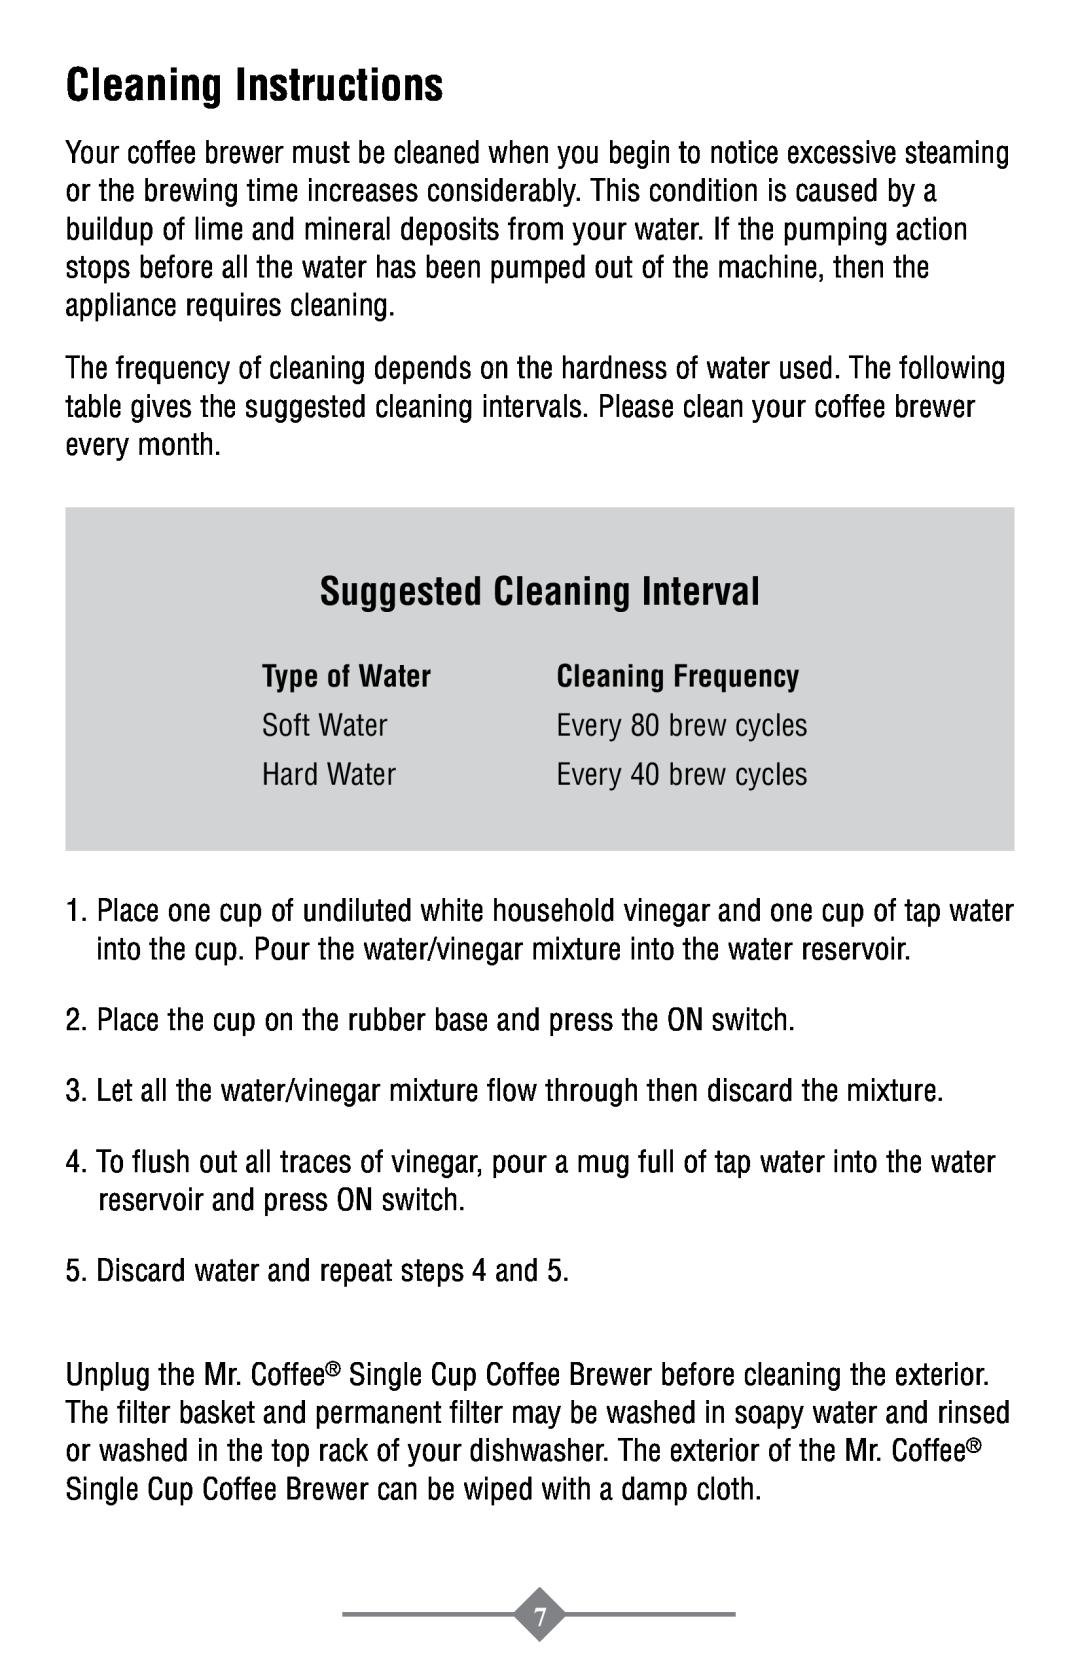 Mr. Coffee PTC13-100 instruction manual Cleaning Instructions, Suggested Cleaning Interval, Type of Water 